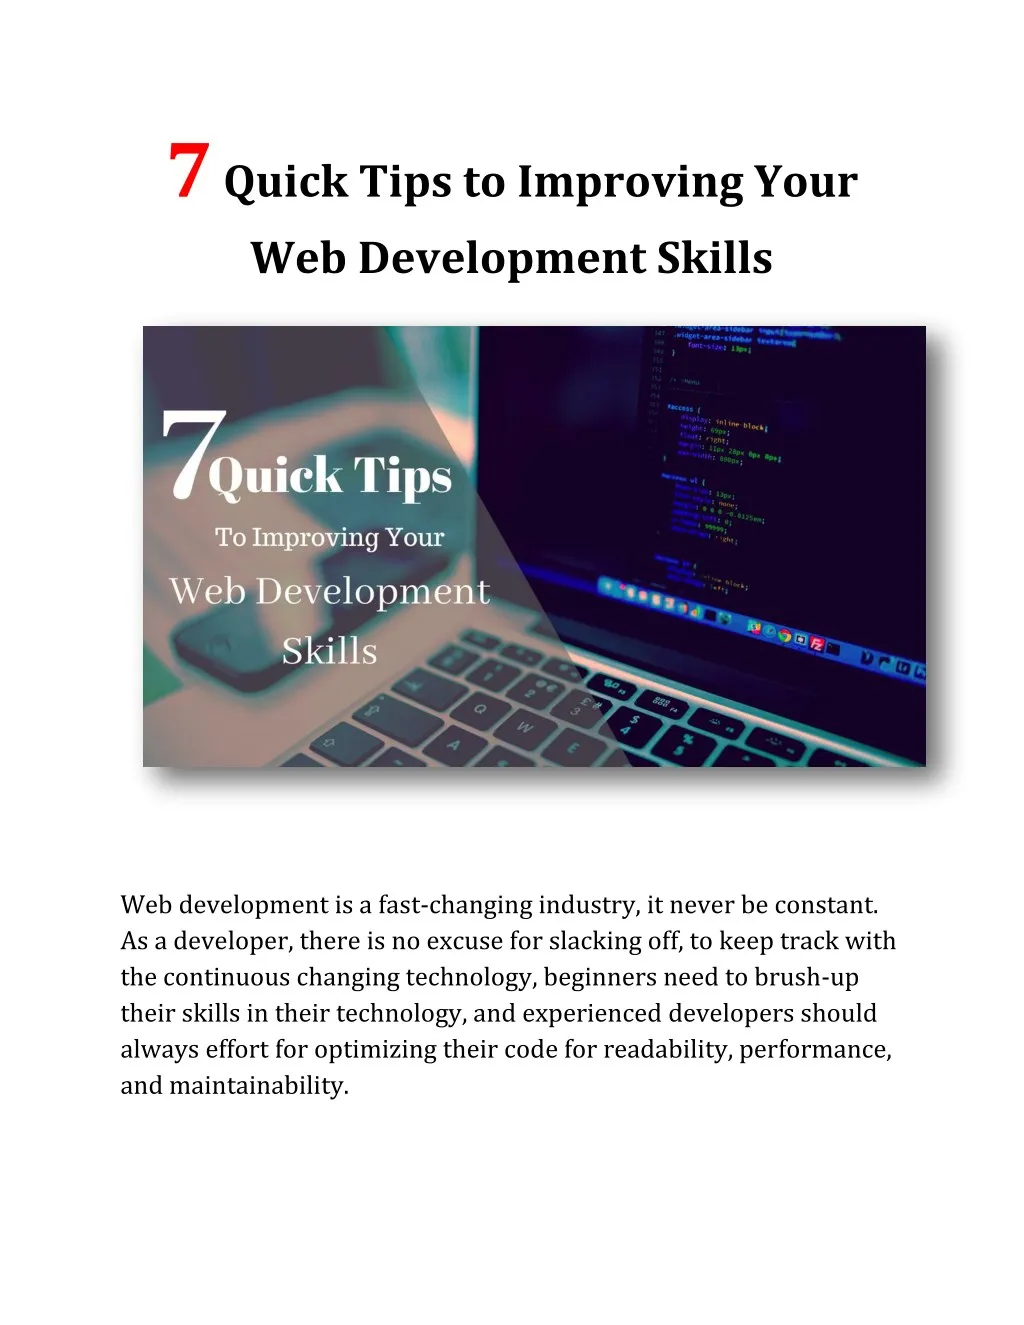 7 quick tips to improving your web development